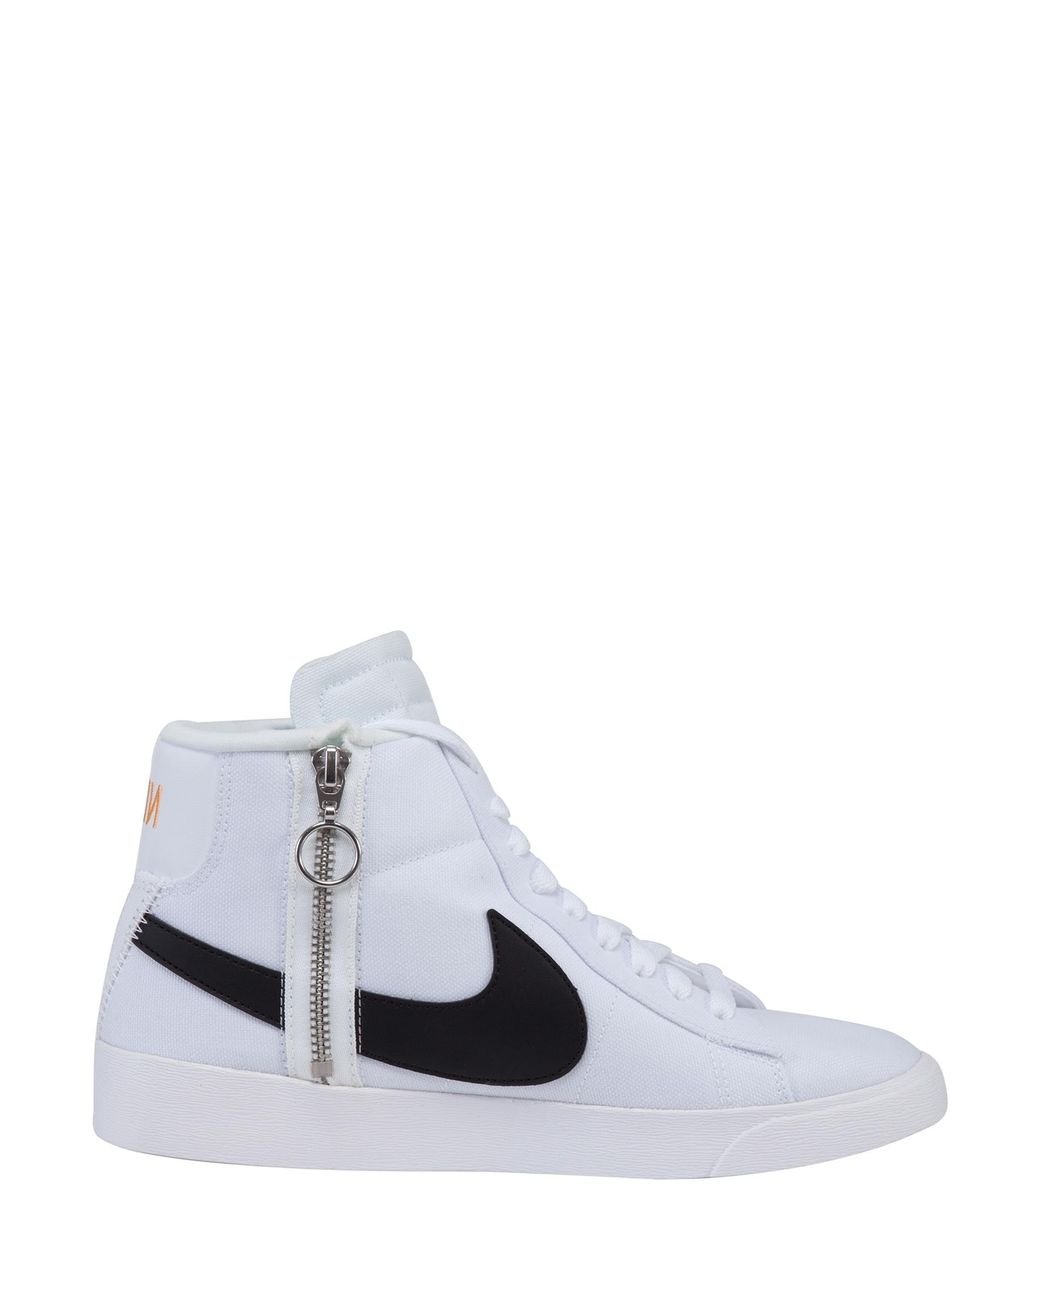 Nike Blazer Mid Rebel High-top Sneakers In White Canvas With Lace-up And  Zip Closure | Lyst